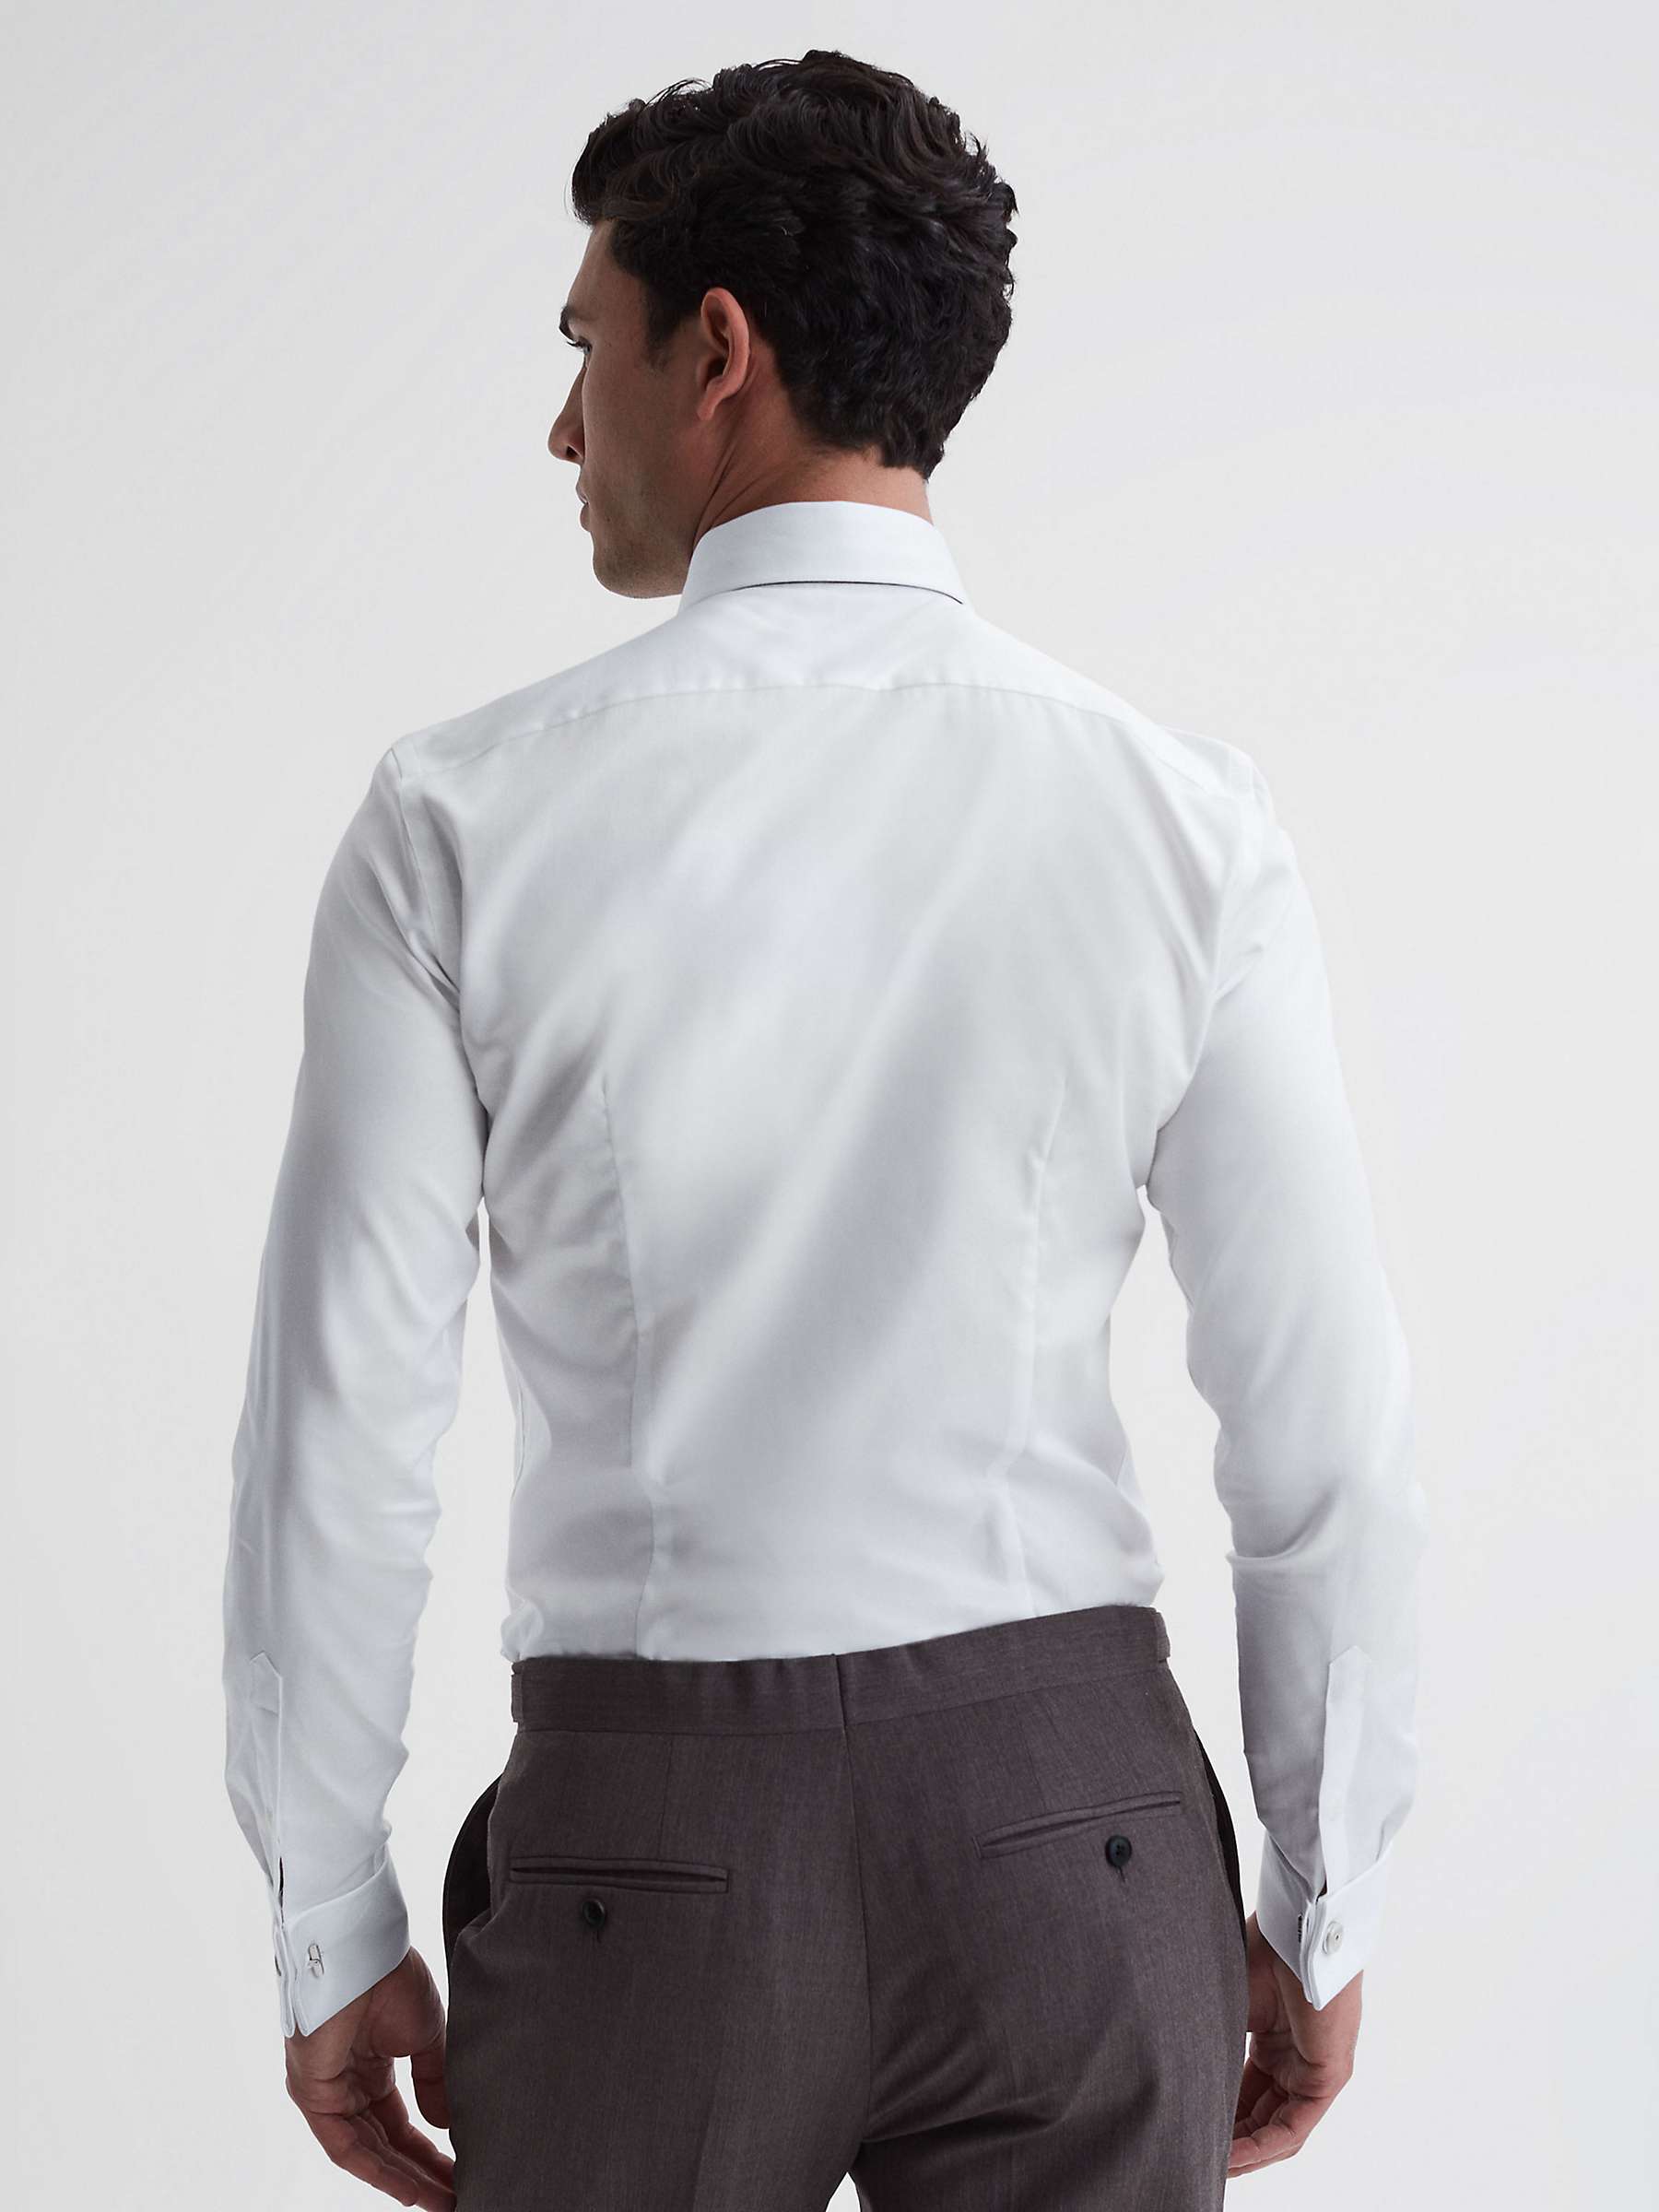 Buy Reiss Premote Long Sleeve Double Cuff Shirt, White Online at johnlewis.com